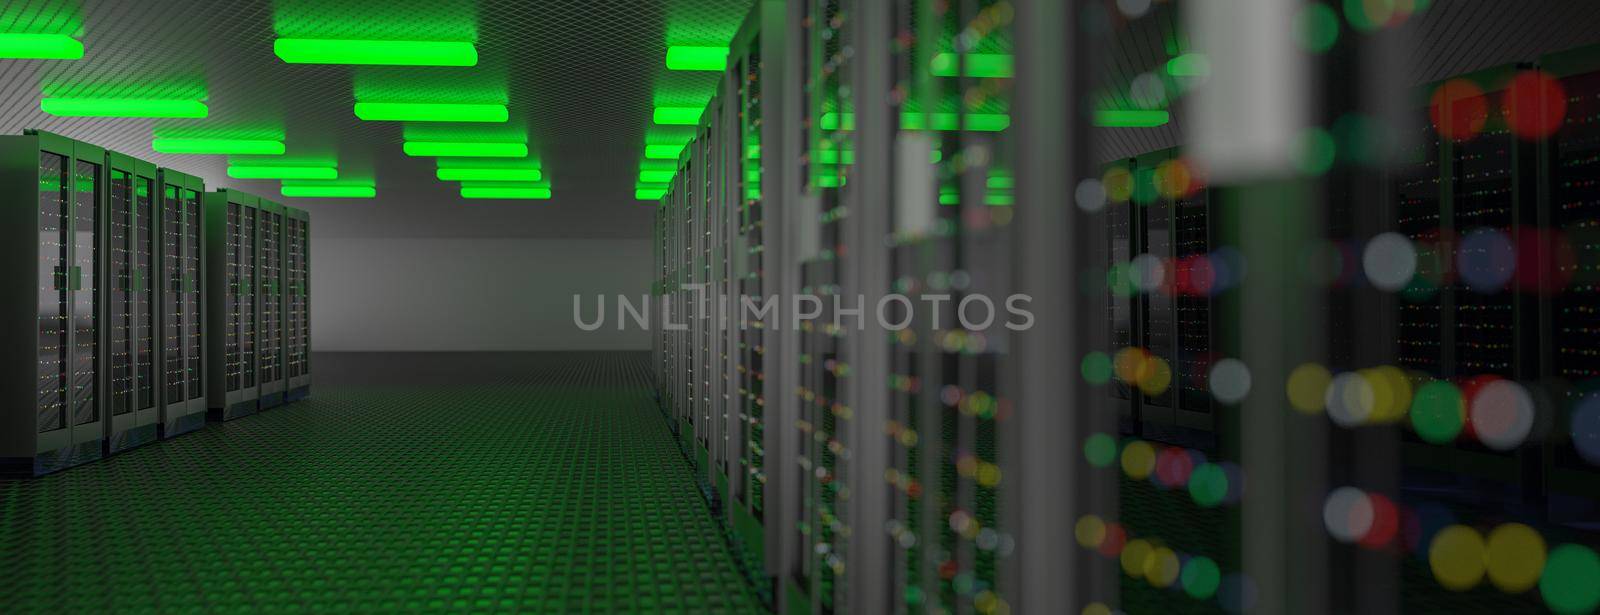 Servers. Servers room data center. Backup, mining, hosting, mainframe, farm and computer rack with storage information. 3d rendering by kwarkot